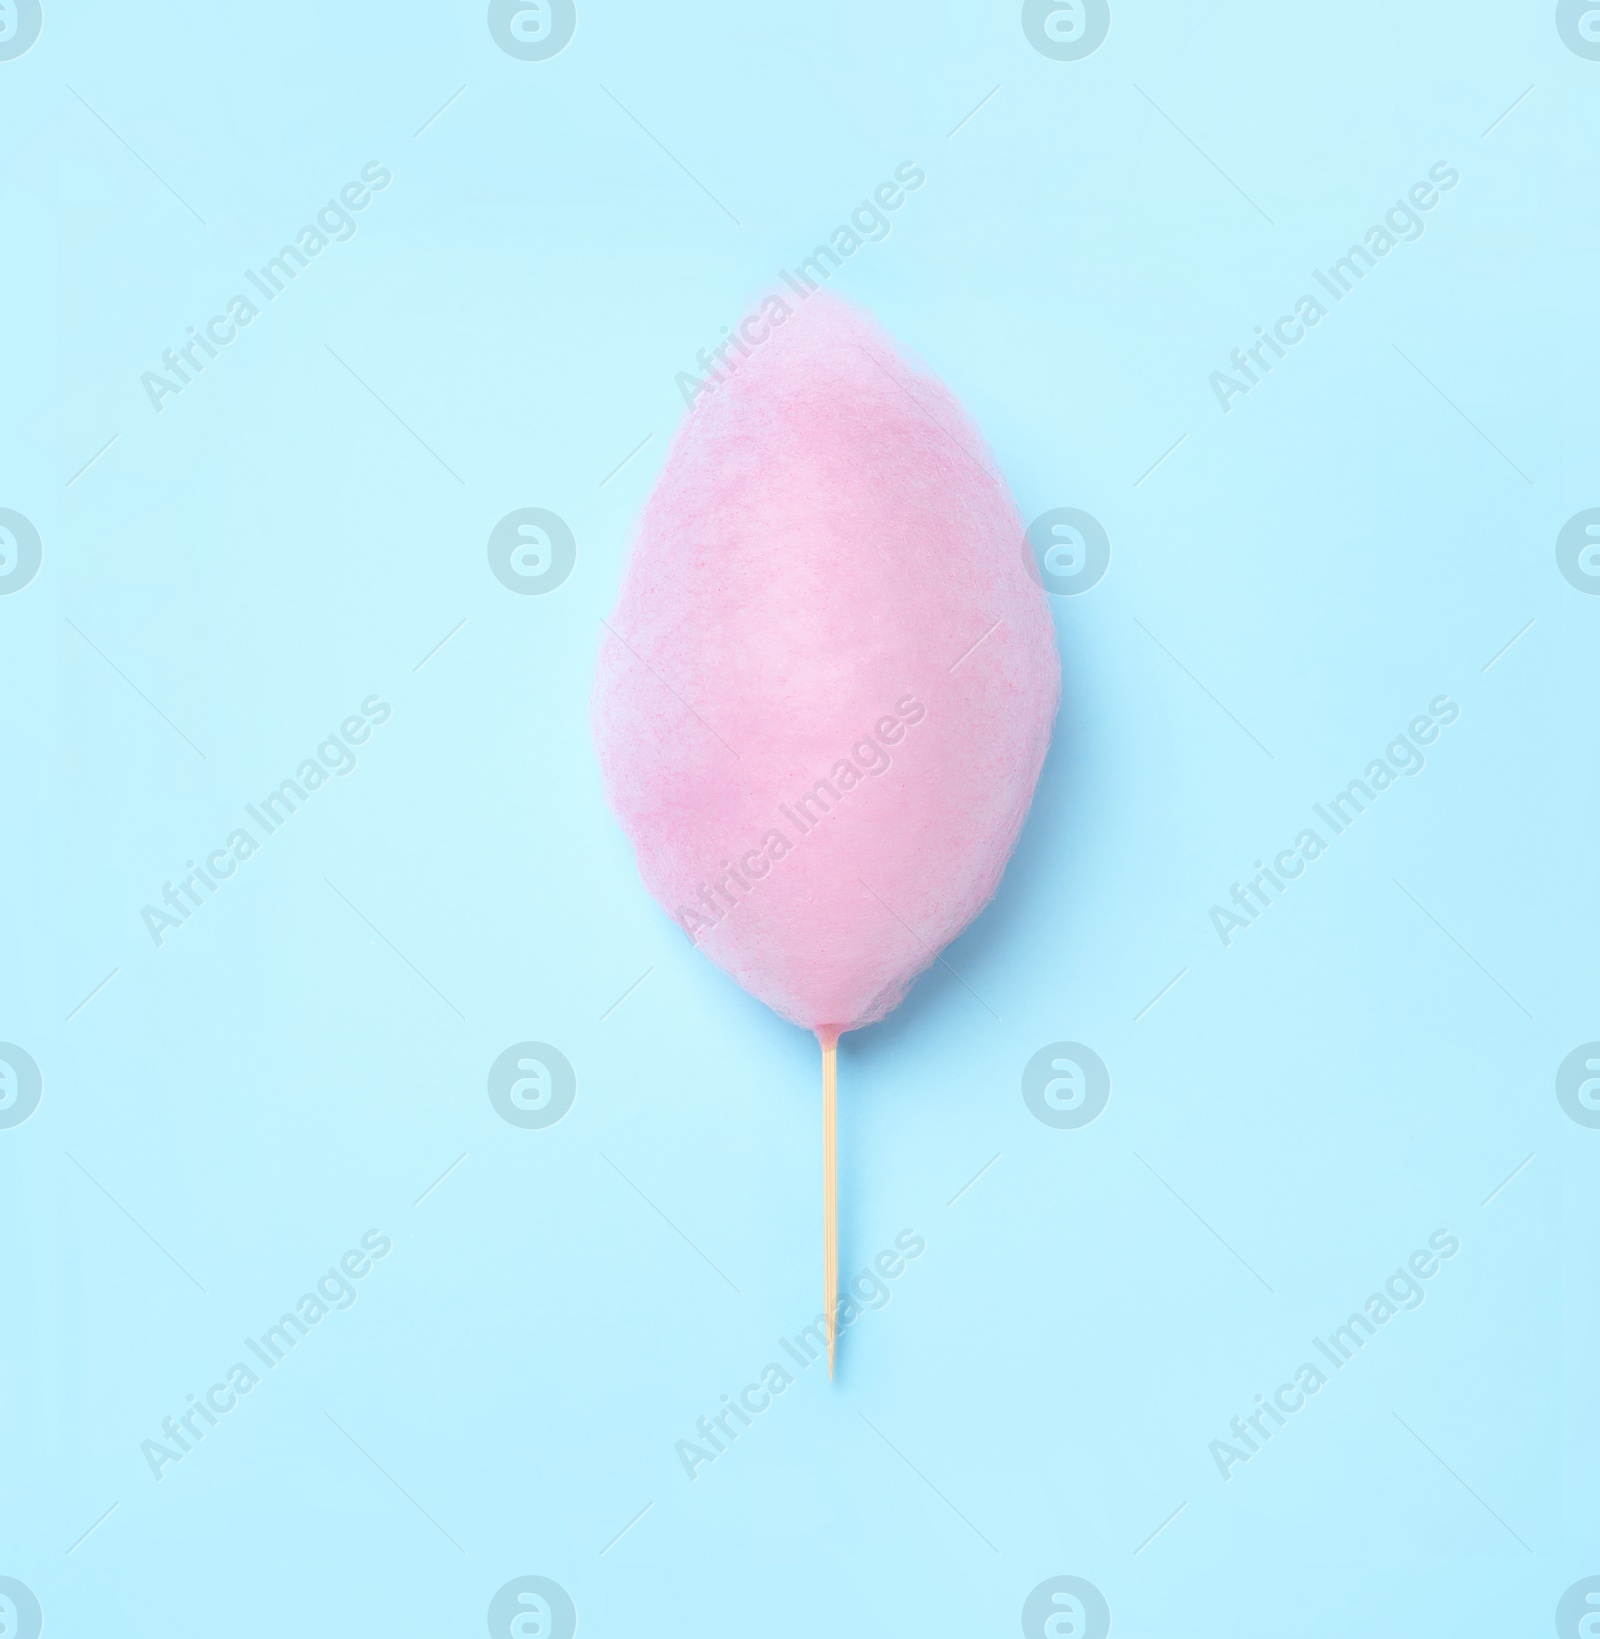 Photo of Sweet pink cotton candy on light blue background, top view